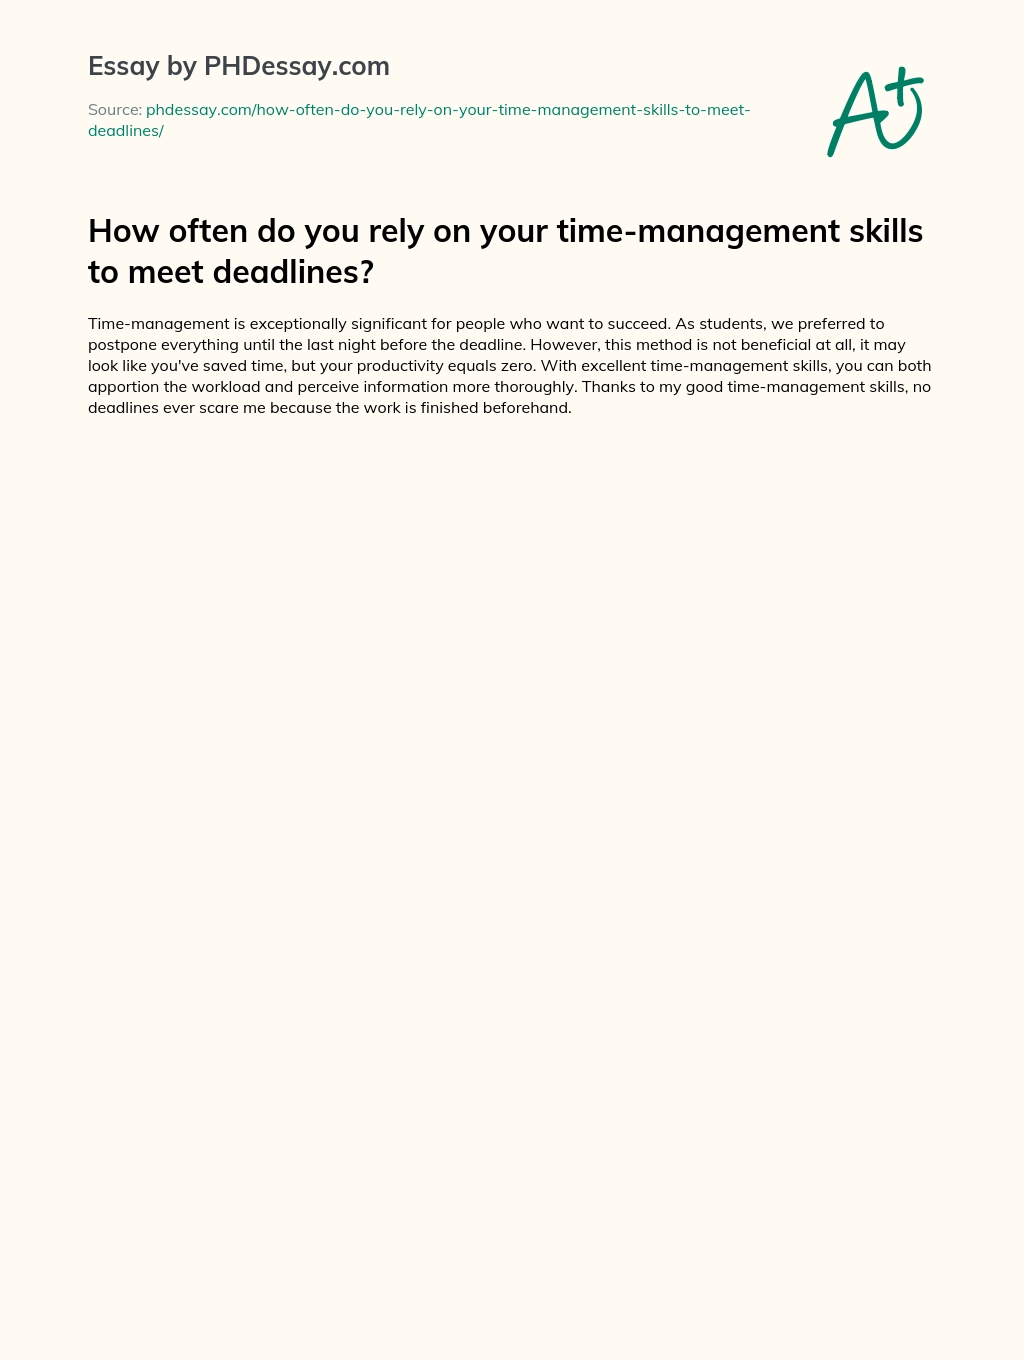 How often do you rely on your time-management skills to meet deadlines? essay